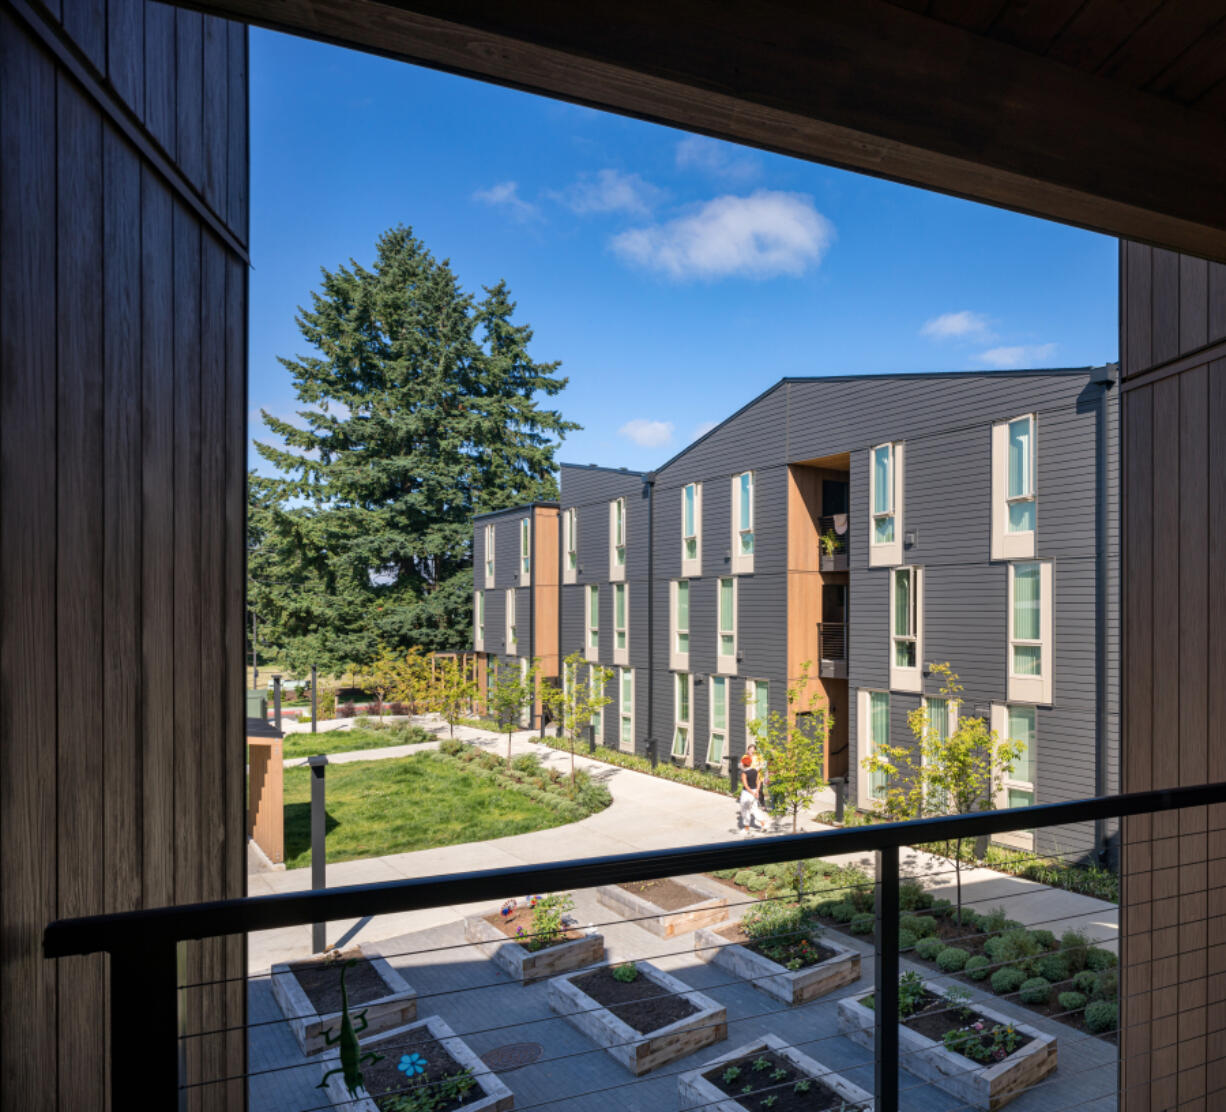 The Elwood permanent supportive housing complex has a community garden among other trauma-informed features designed by Access Architecture.